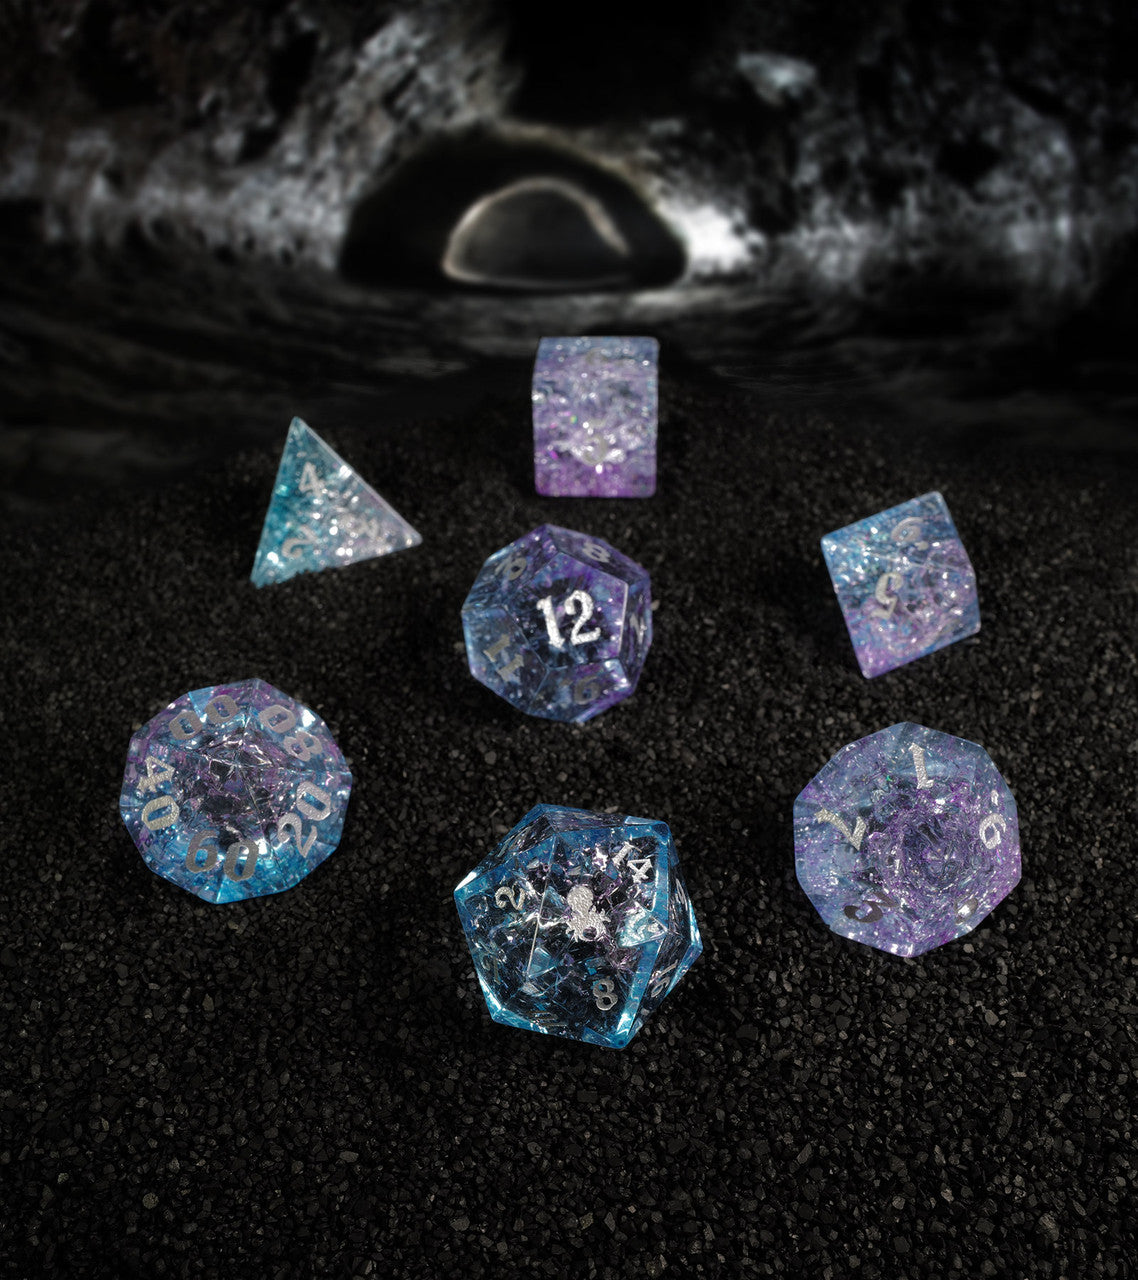 Fragments of Neat Comet Cracked Glass 7PC Glass Dice Set